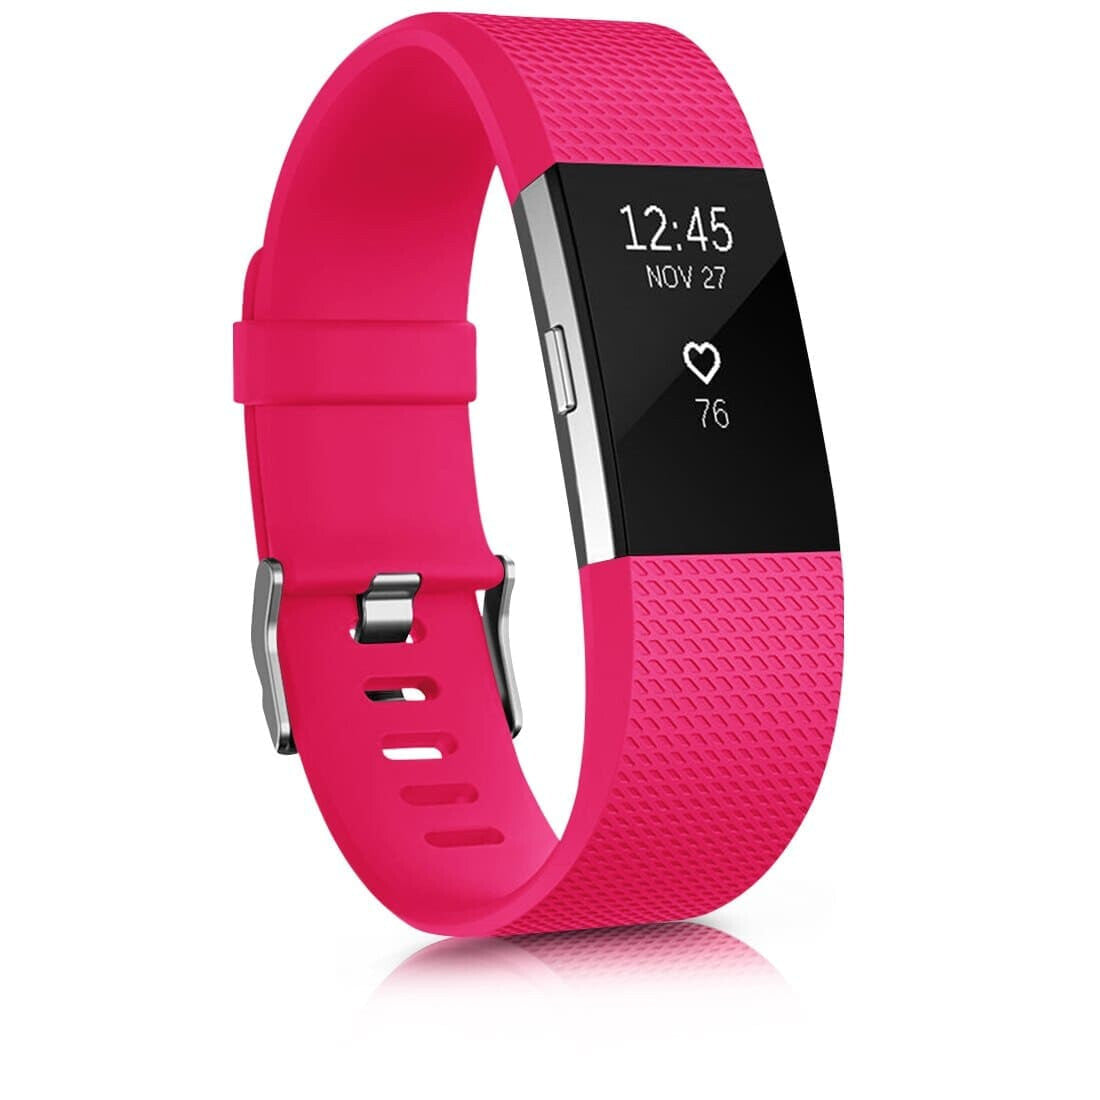 Silikon Armband für Fitbit Charge 2 - Rosarot / S - Fitbit Armband